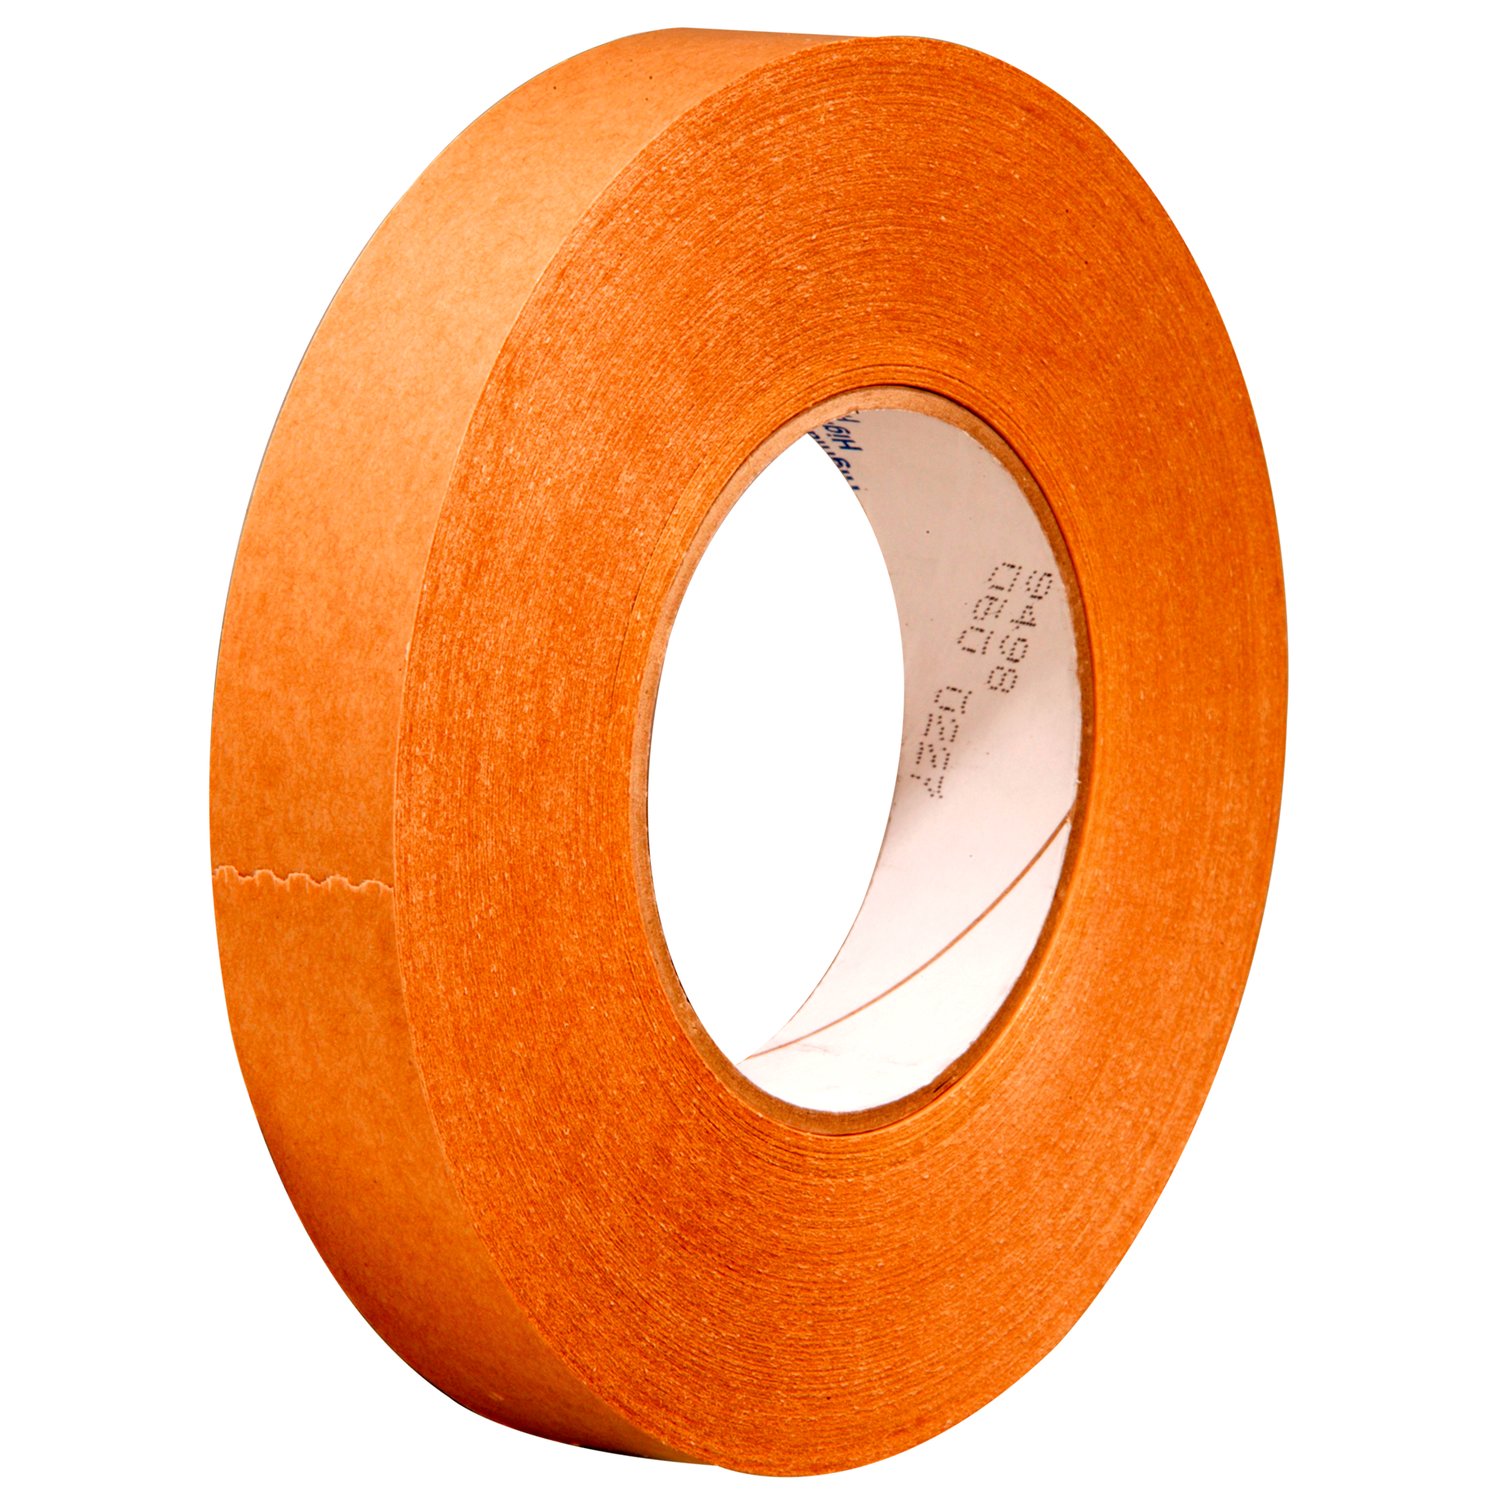 7000123444 - 3M Adhesive Transfer Tape 9498, Clear, 1/2 in x 120 yd, 2 mil, 72 rolls
per case